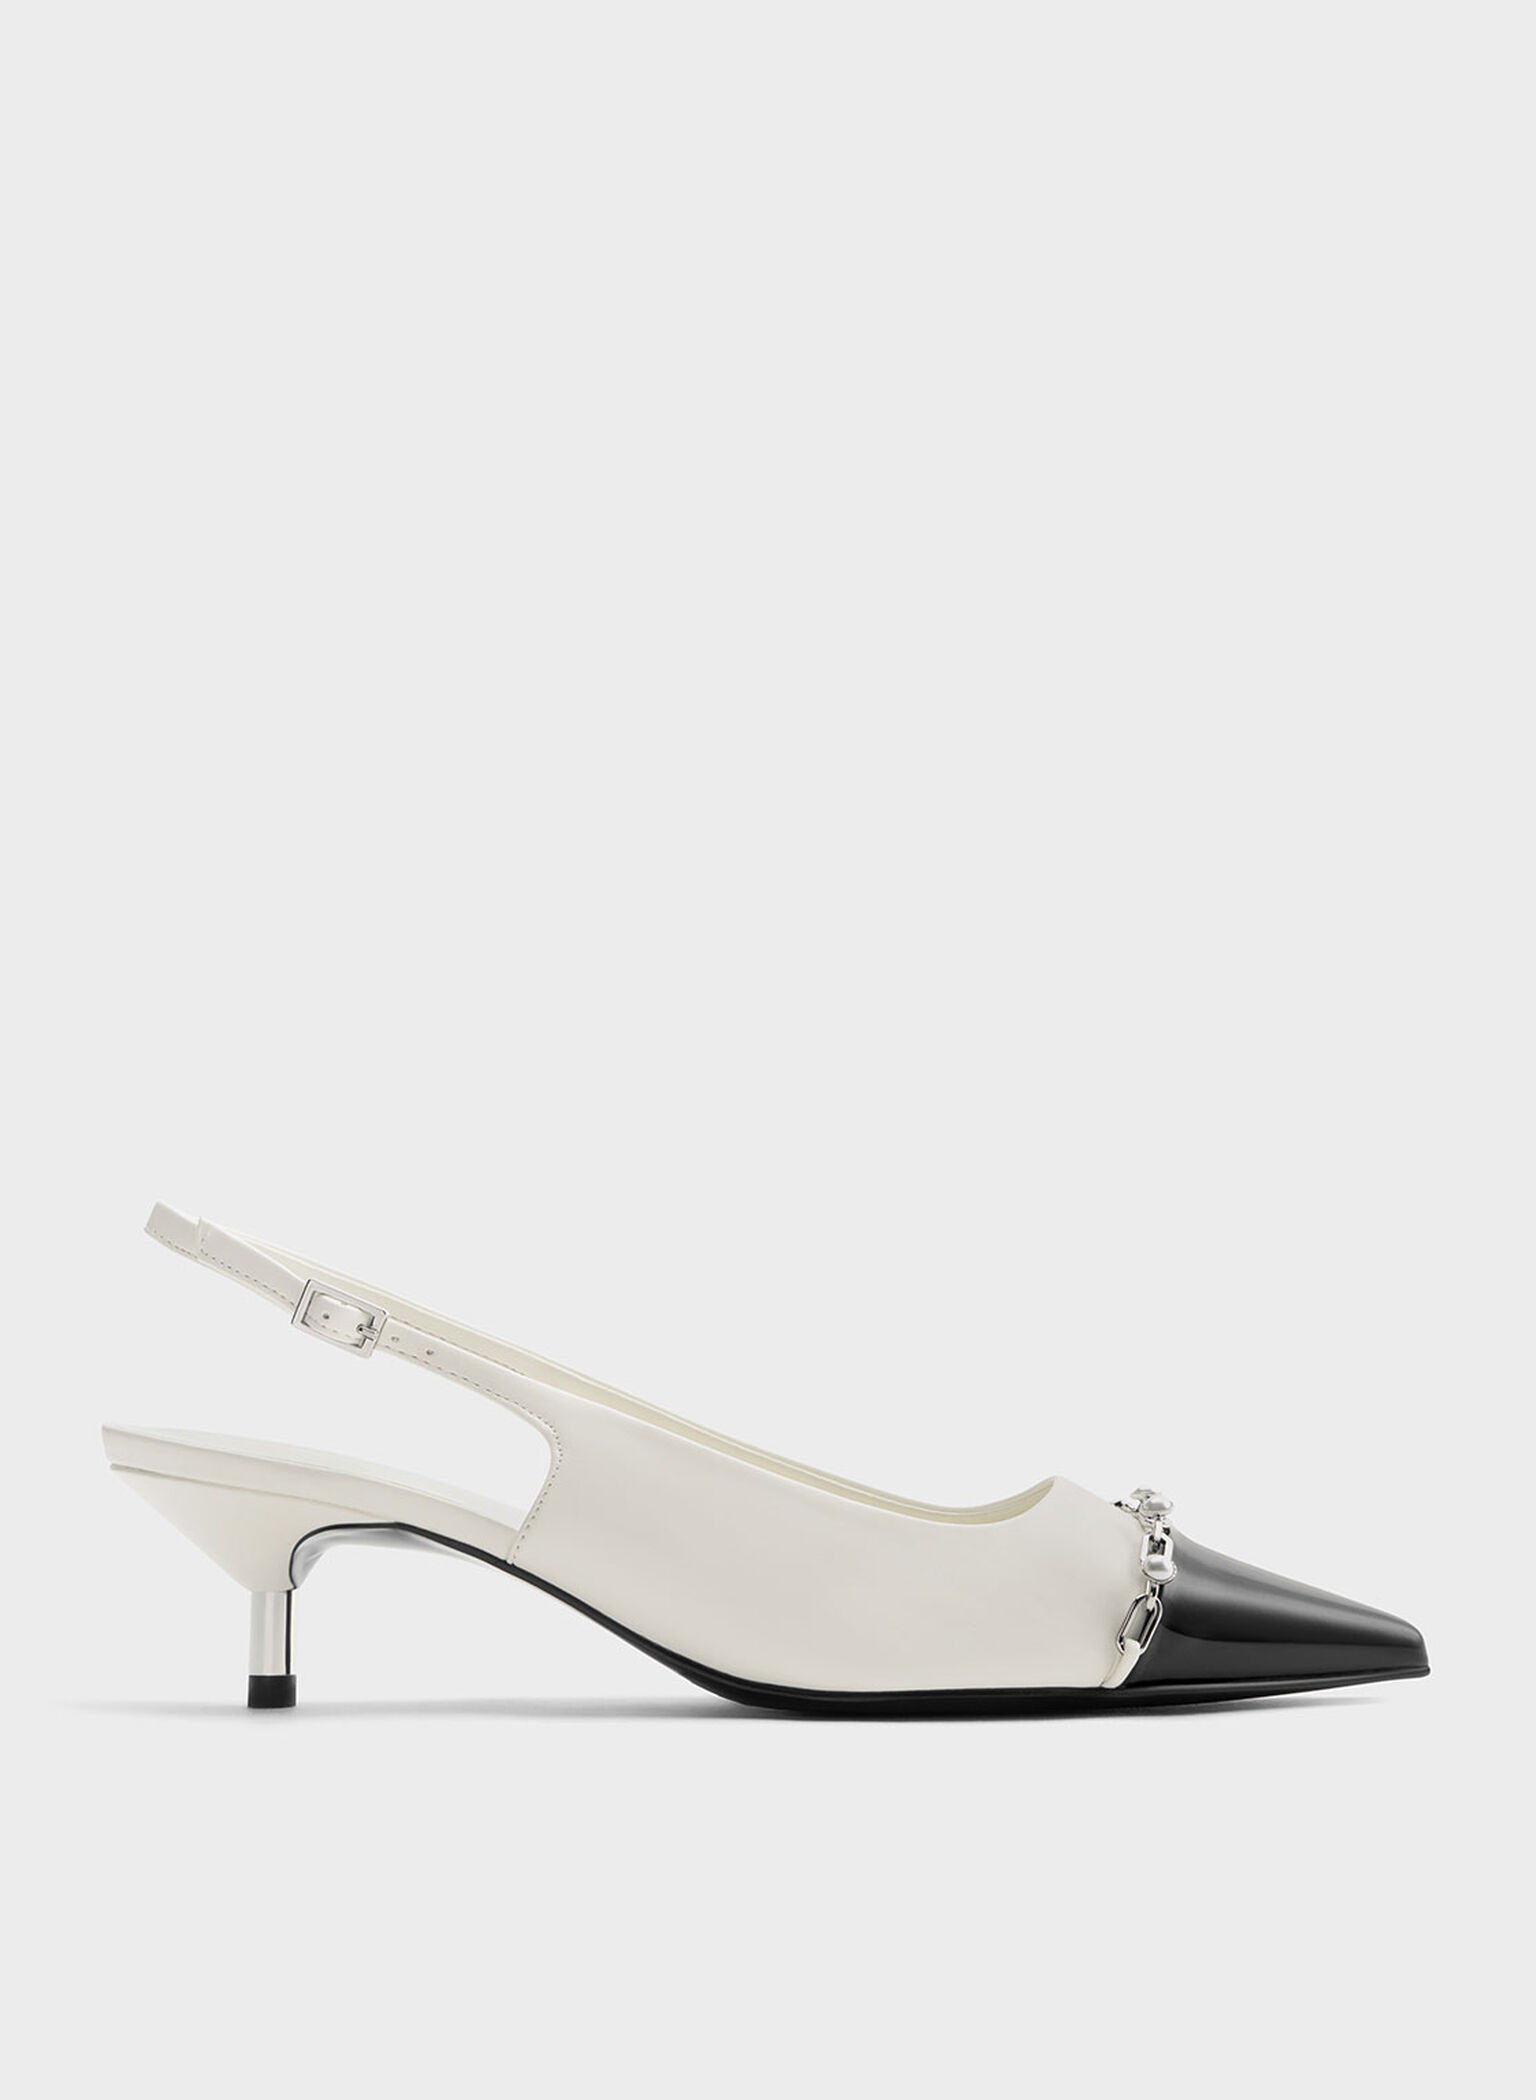 Patent Pearl Chain-Link Slingback Pumps, White, hi-res